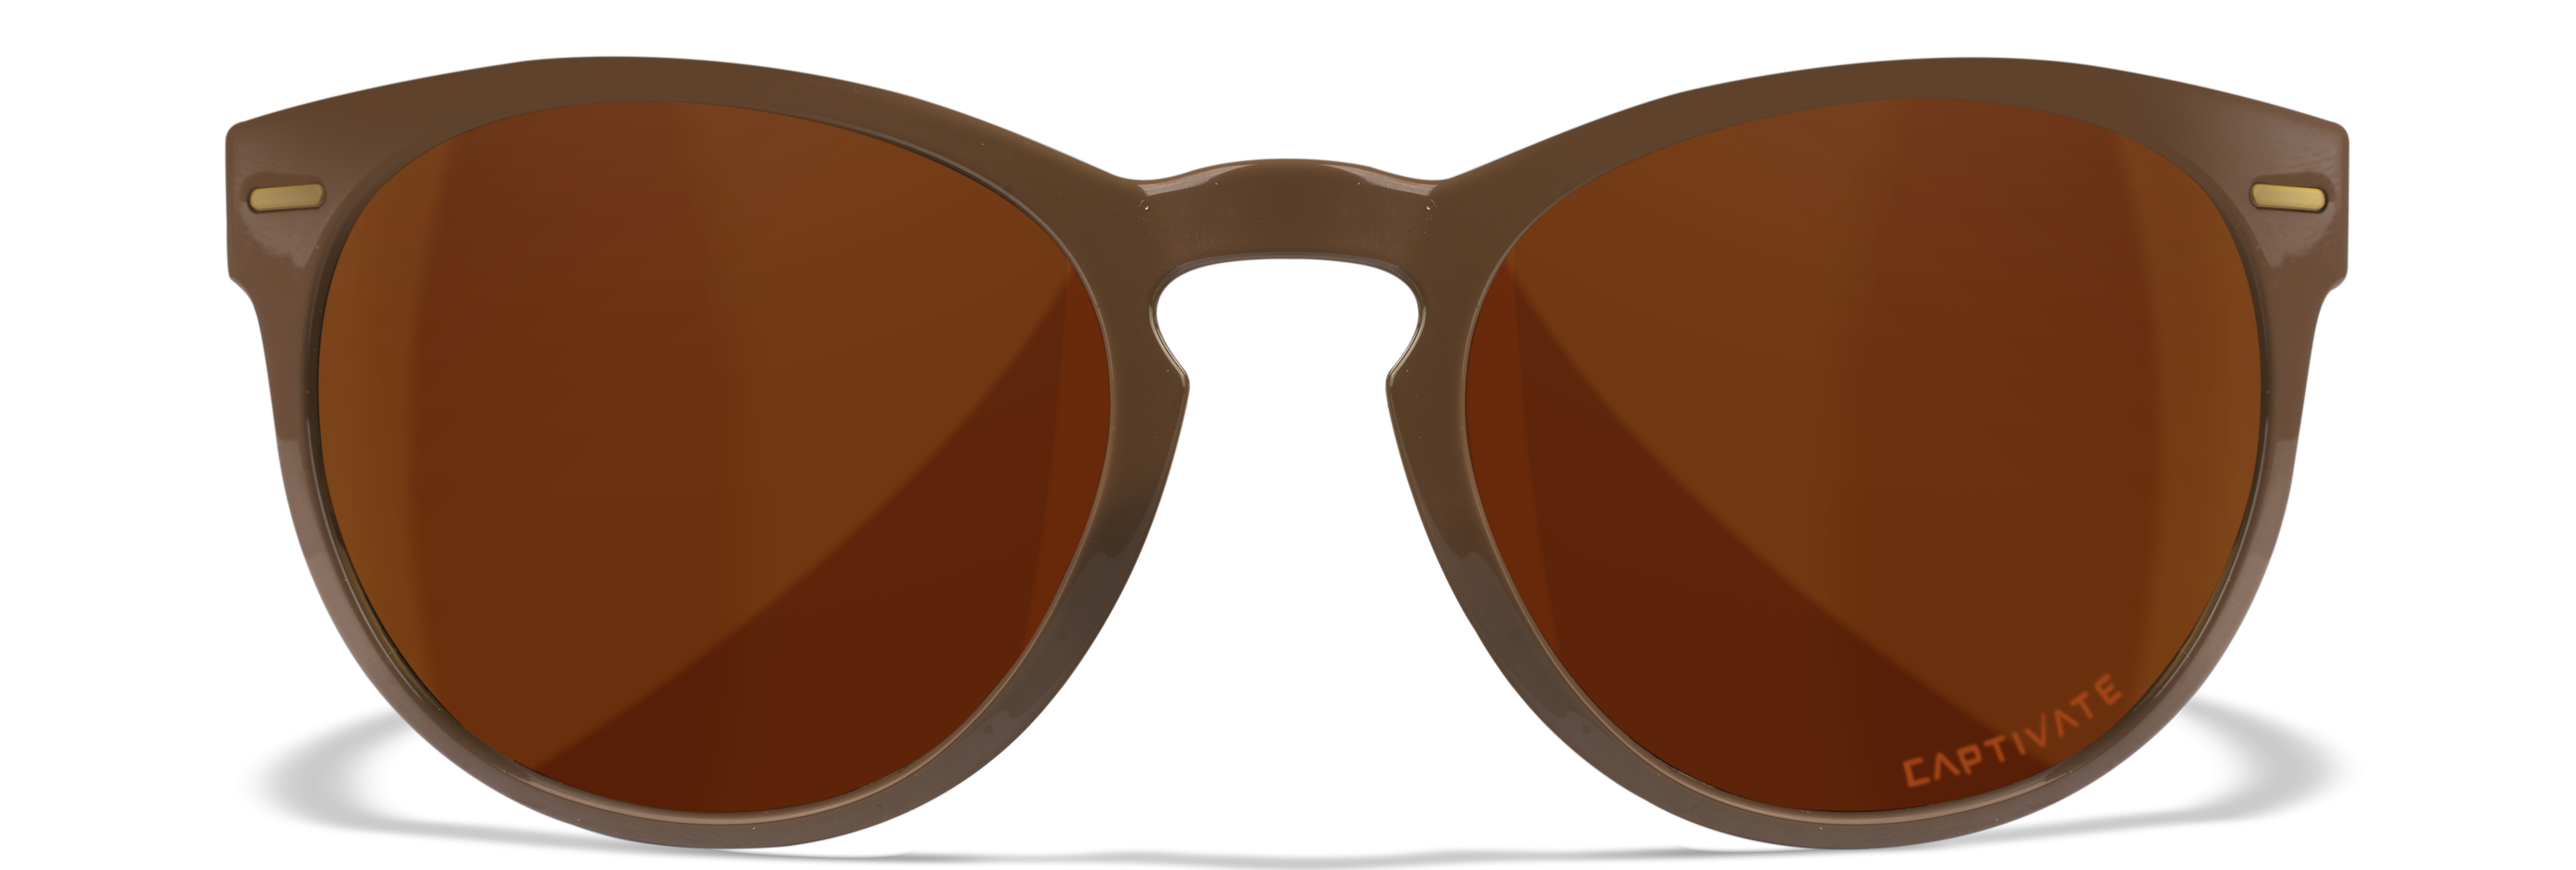 Wiley-X-COVERT-Captivate-Polarized-Copper-Gloss-CoffeeCrystal-Brown-Frame-CarpStore.pl-Europe-Online-Carp-Shop-7